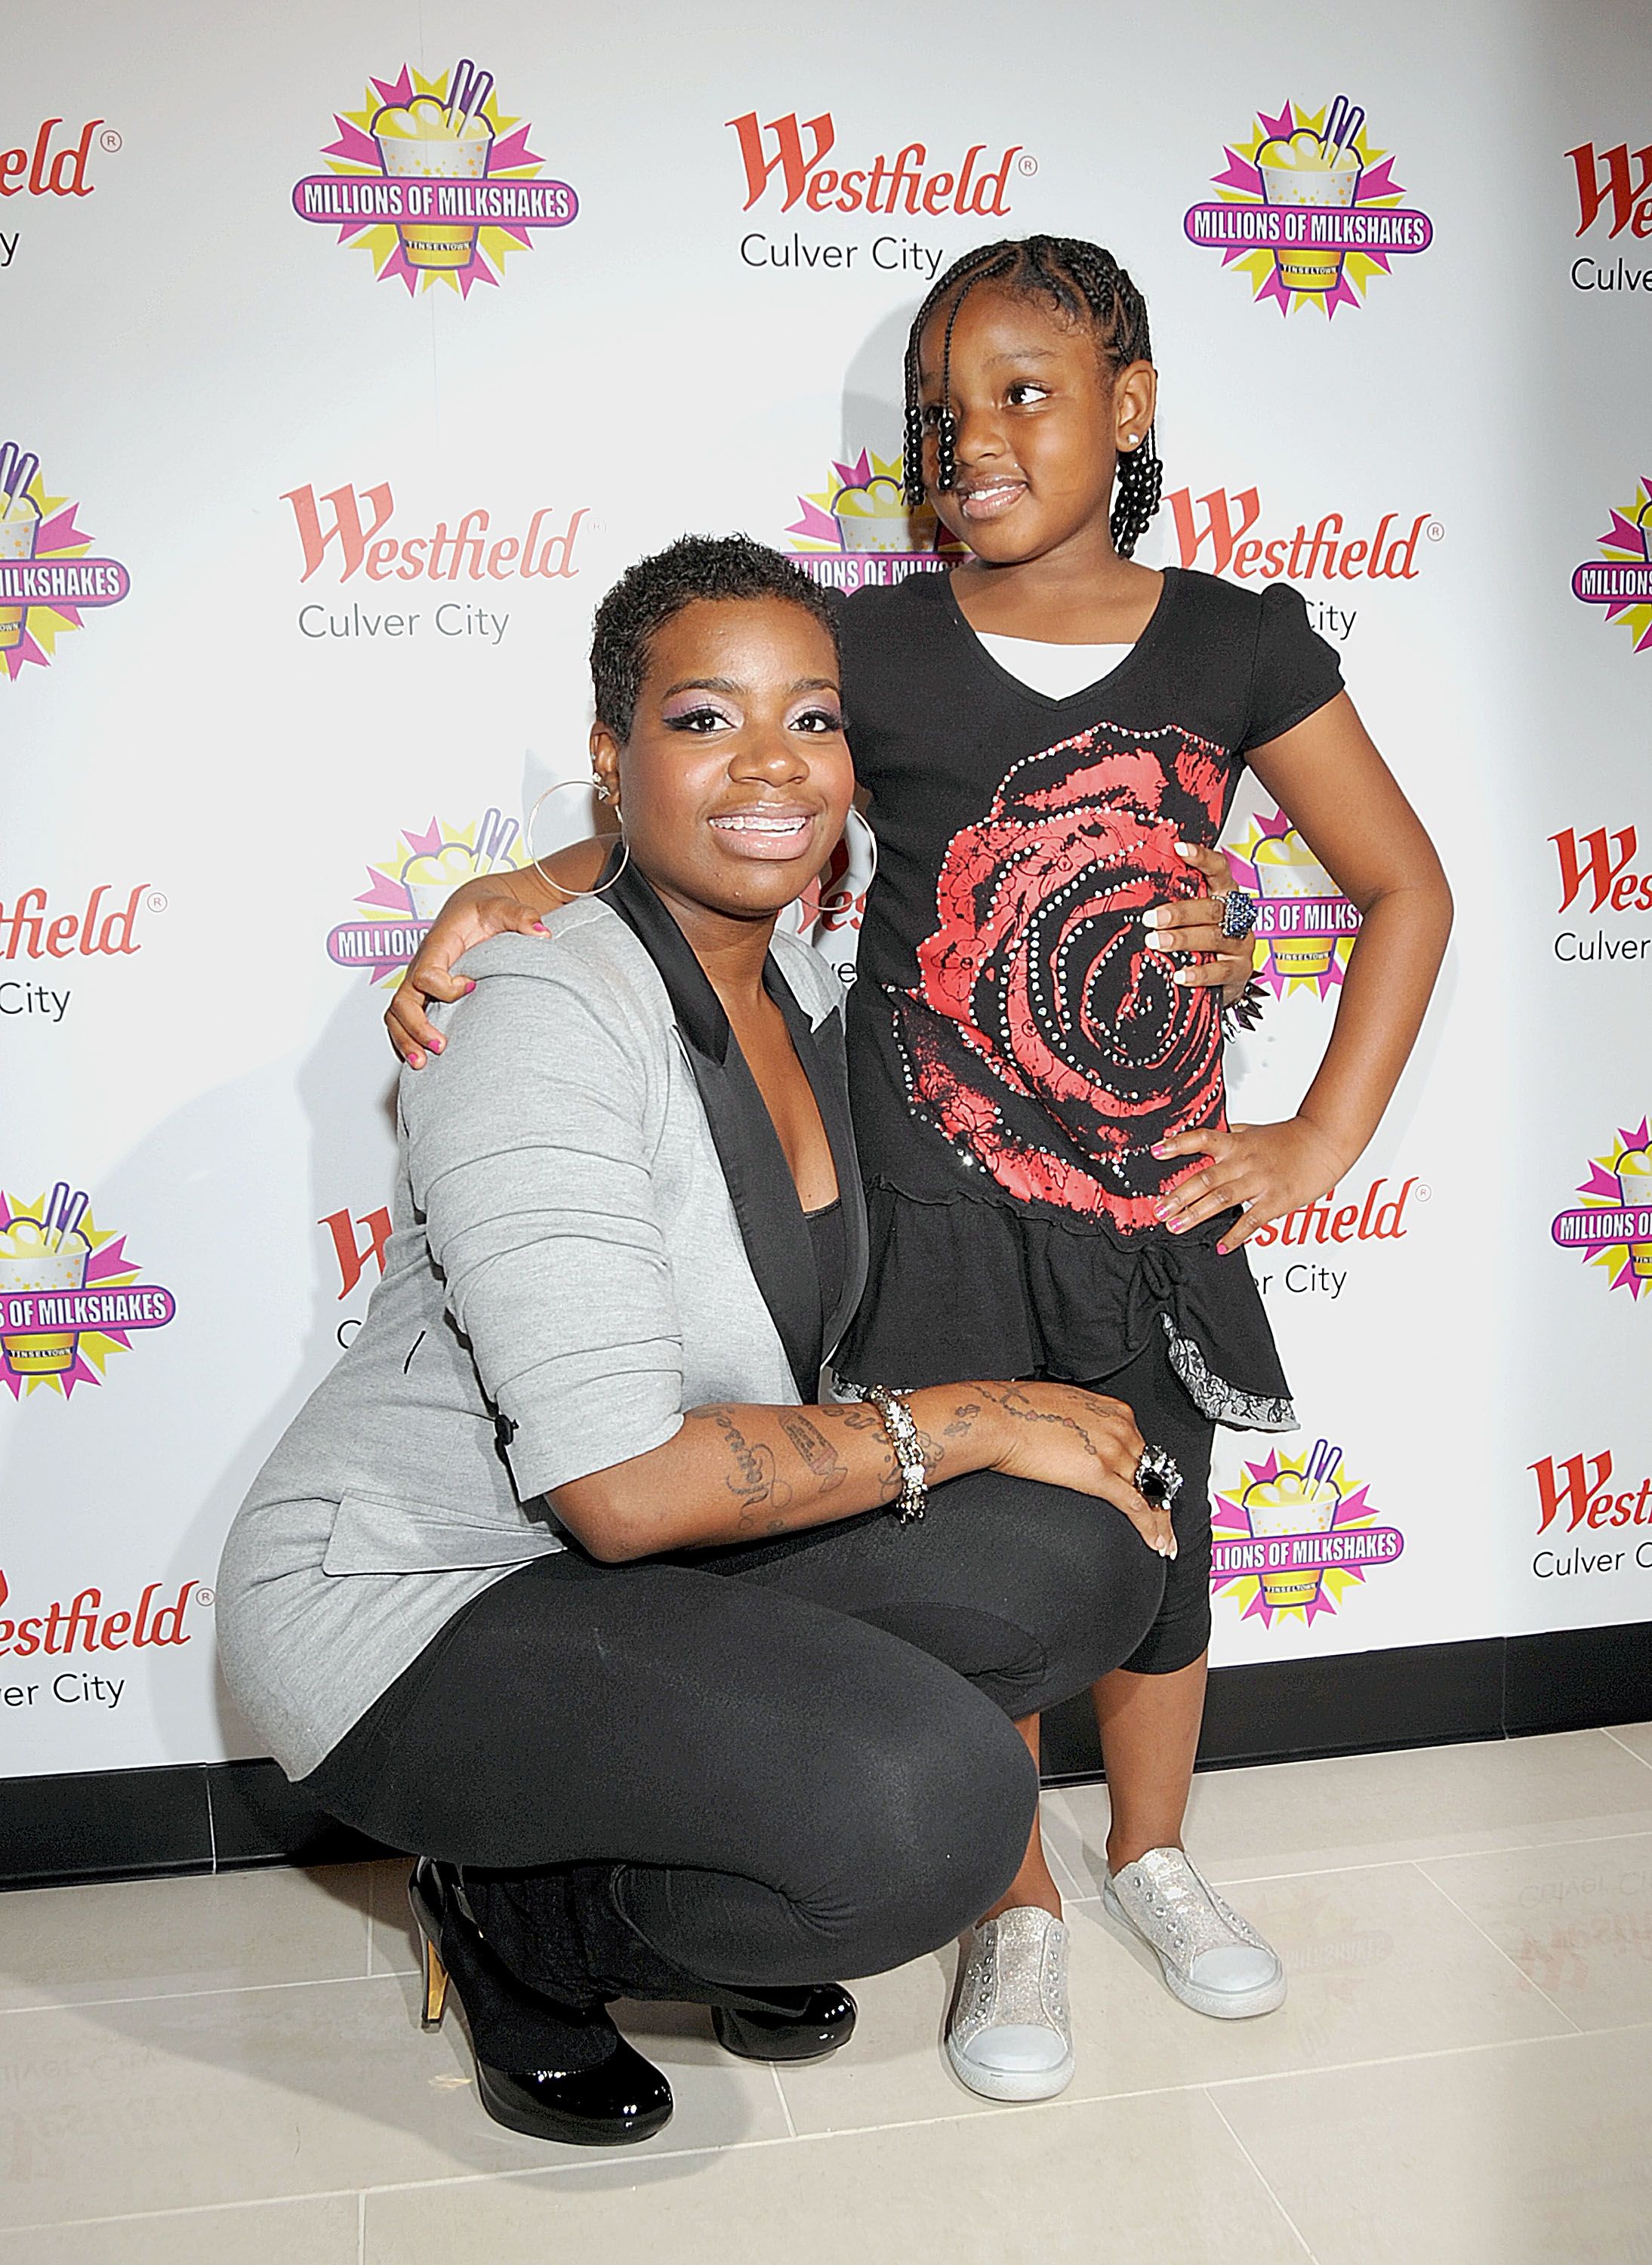 Fantasia Barrino and daughter Zion Barrino attend Millions of Milkshakes on November 24, 2010 in Culver City, California | Photo: Getty Images